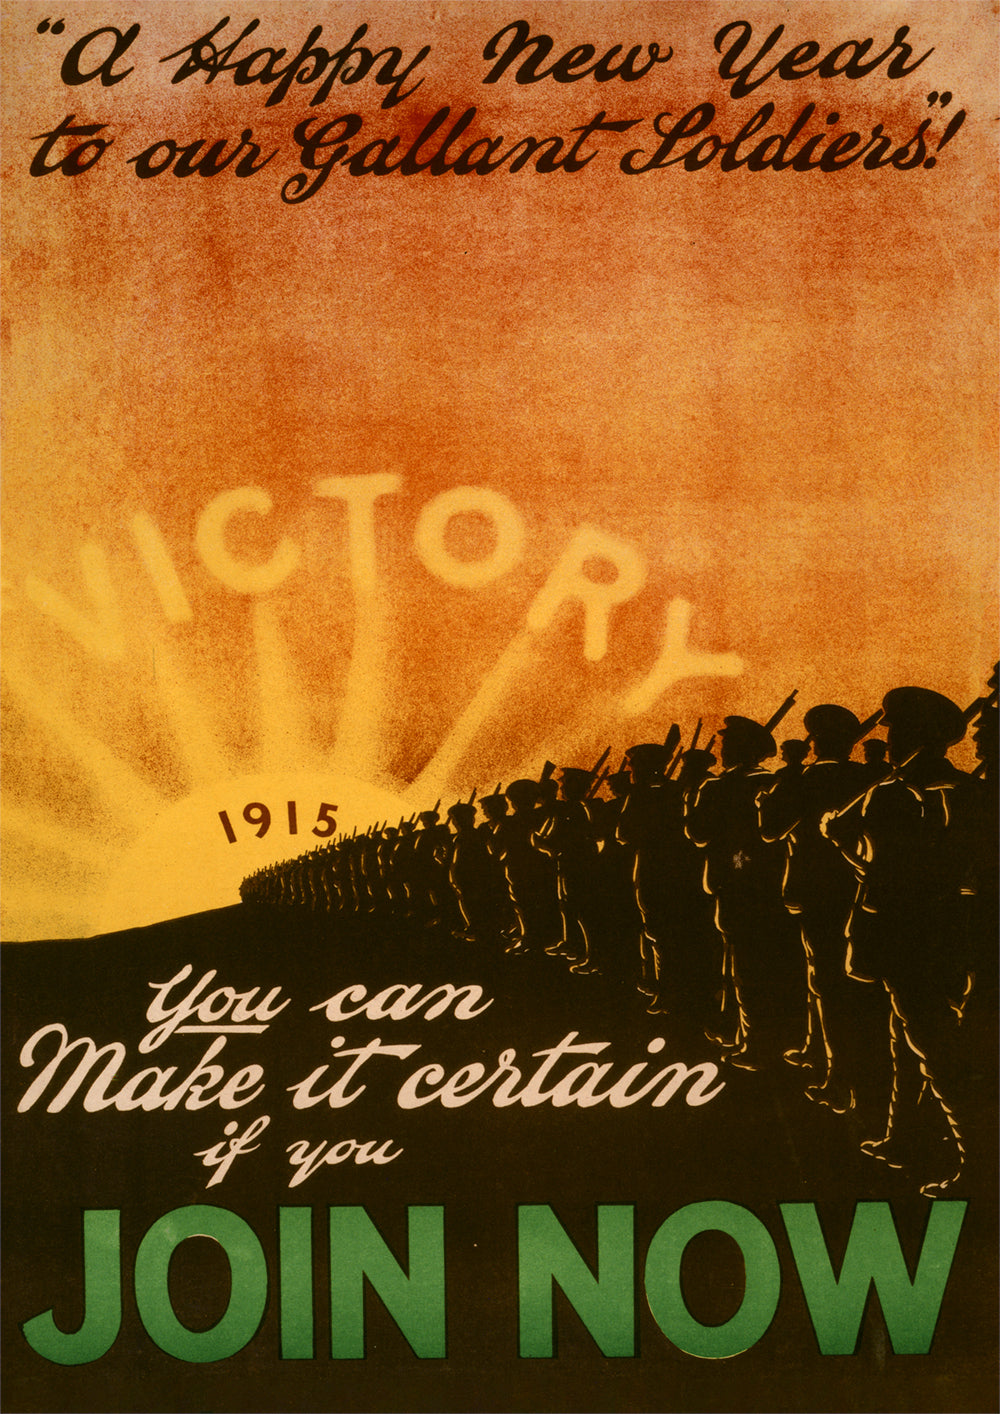 A Happy New Year to our gallant soldiers! – British World War One poster